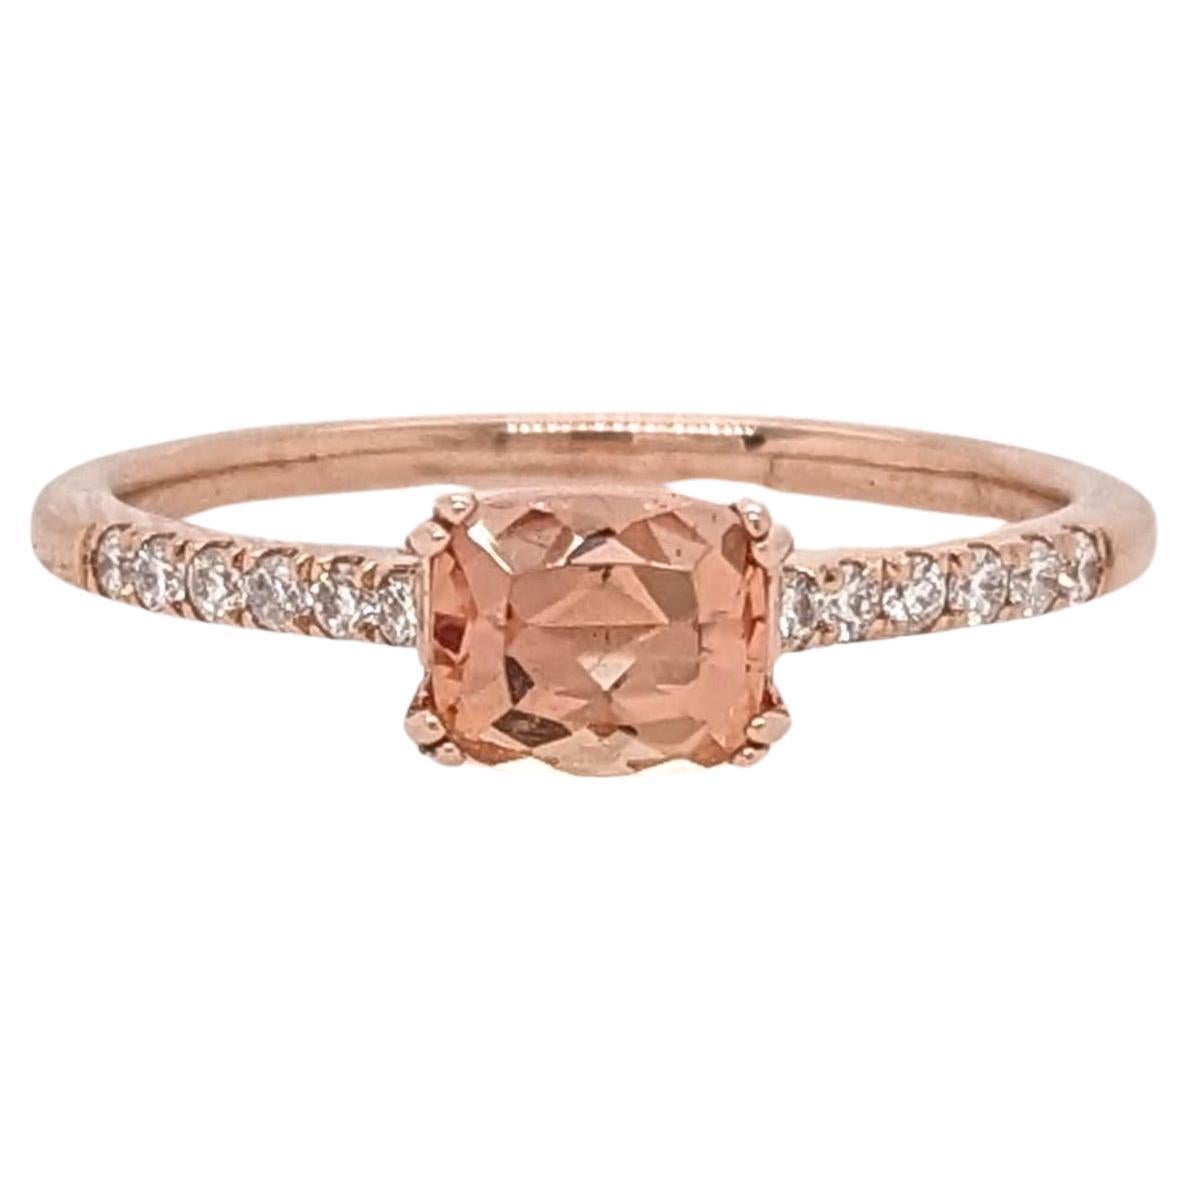 Imperial Topaz Ring w Natural Diamonds in Solid 14K Rose Gold EM 4x6mm